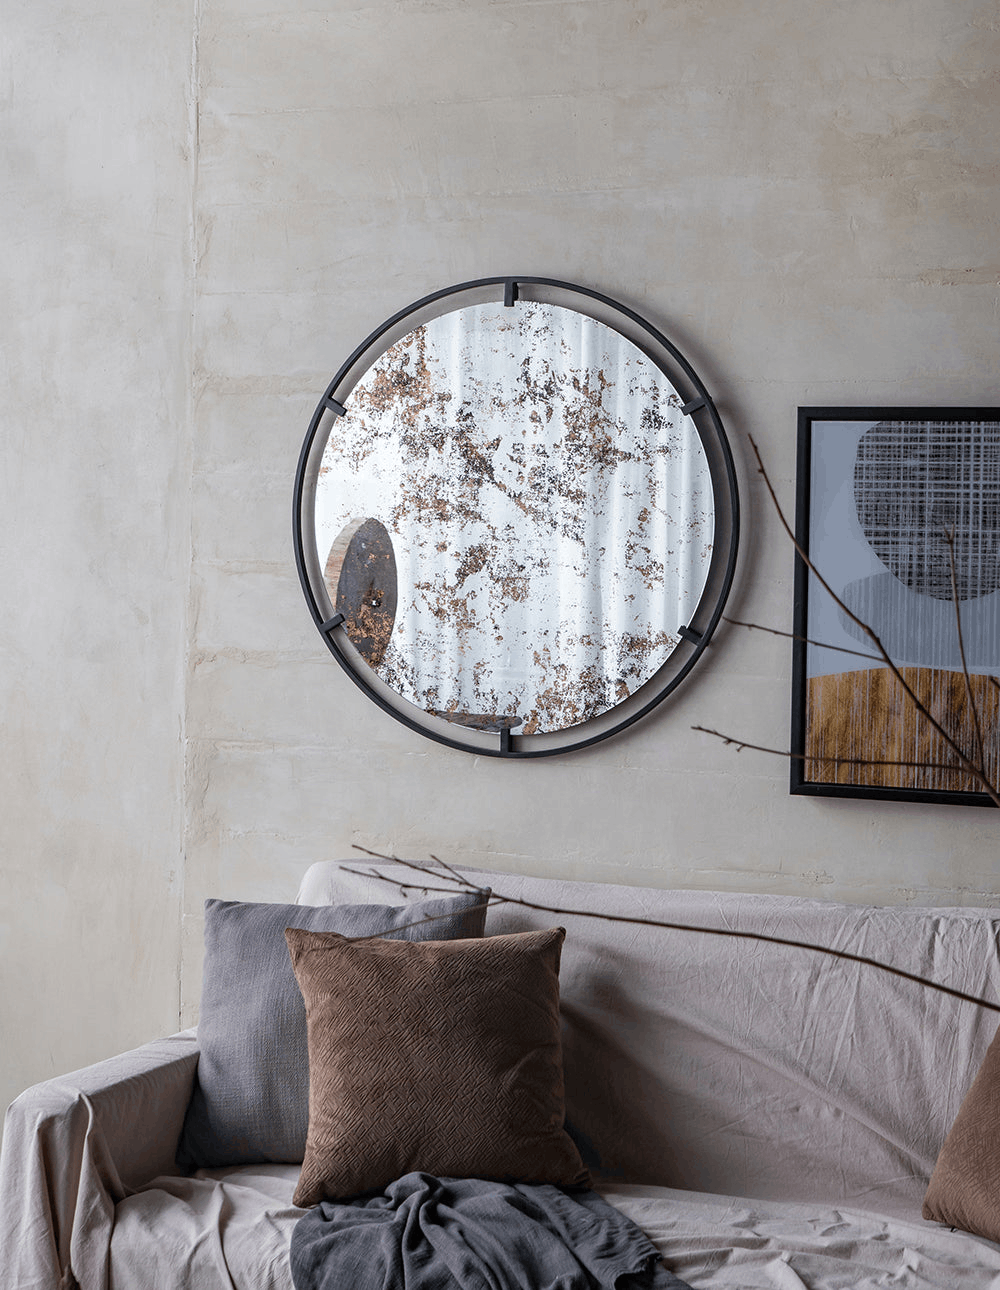 D31.5x0.5" Theodor Mirror with industrial design Round Mirror with Metal Frame for Wall Decor & Entryway Console Lean Against Wall 